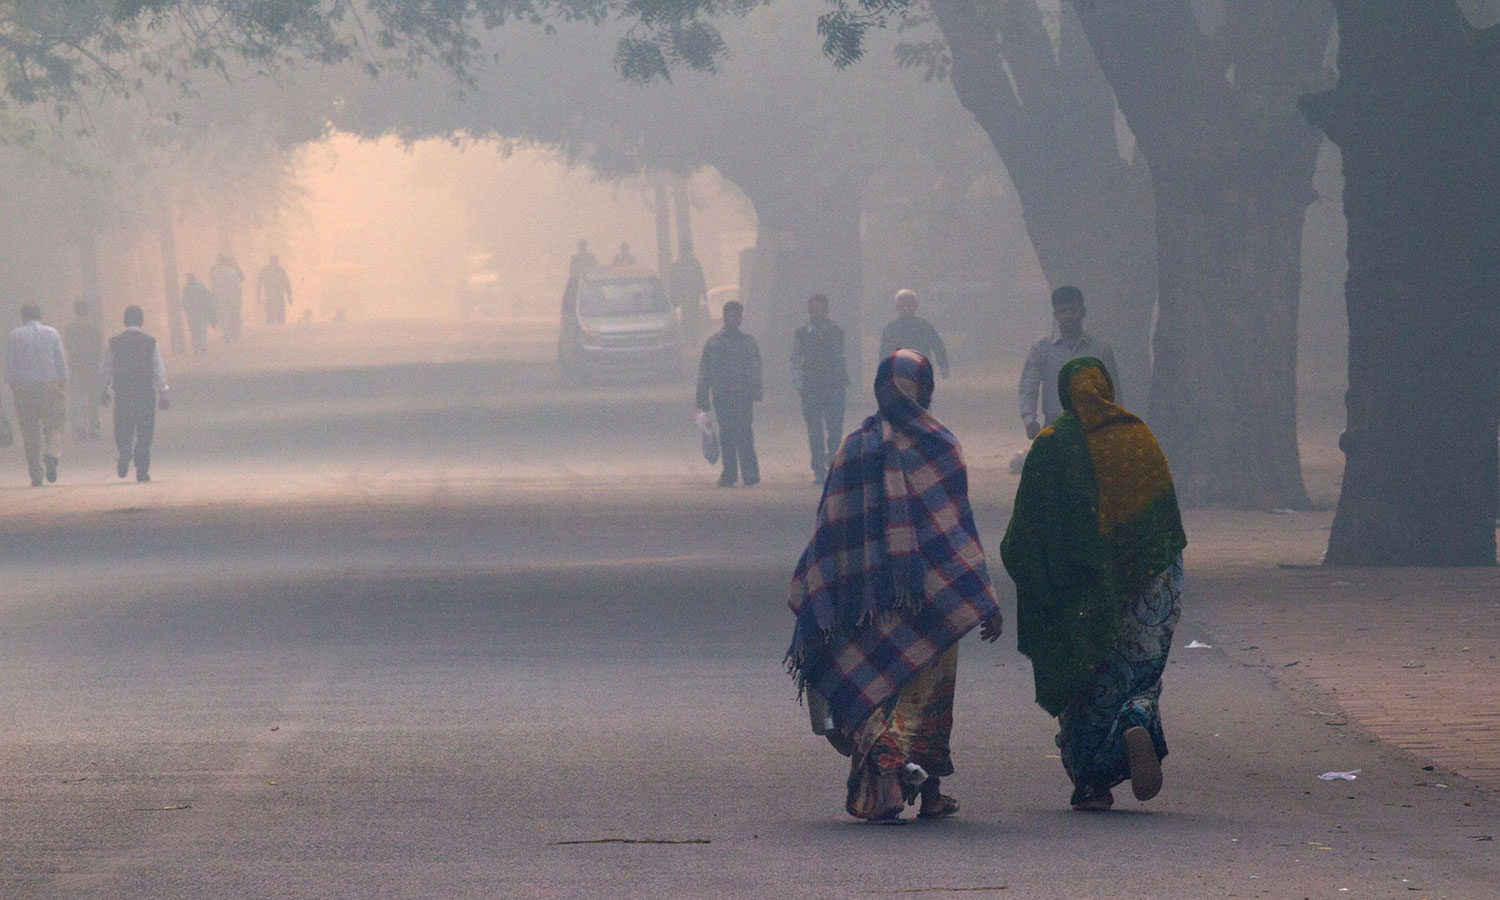 New Delhi, India - November 12, 2012. Daily street life in the early morning during extreme smog conditions.